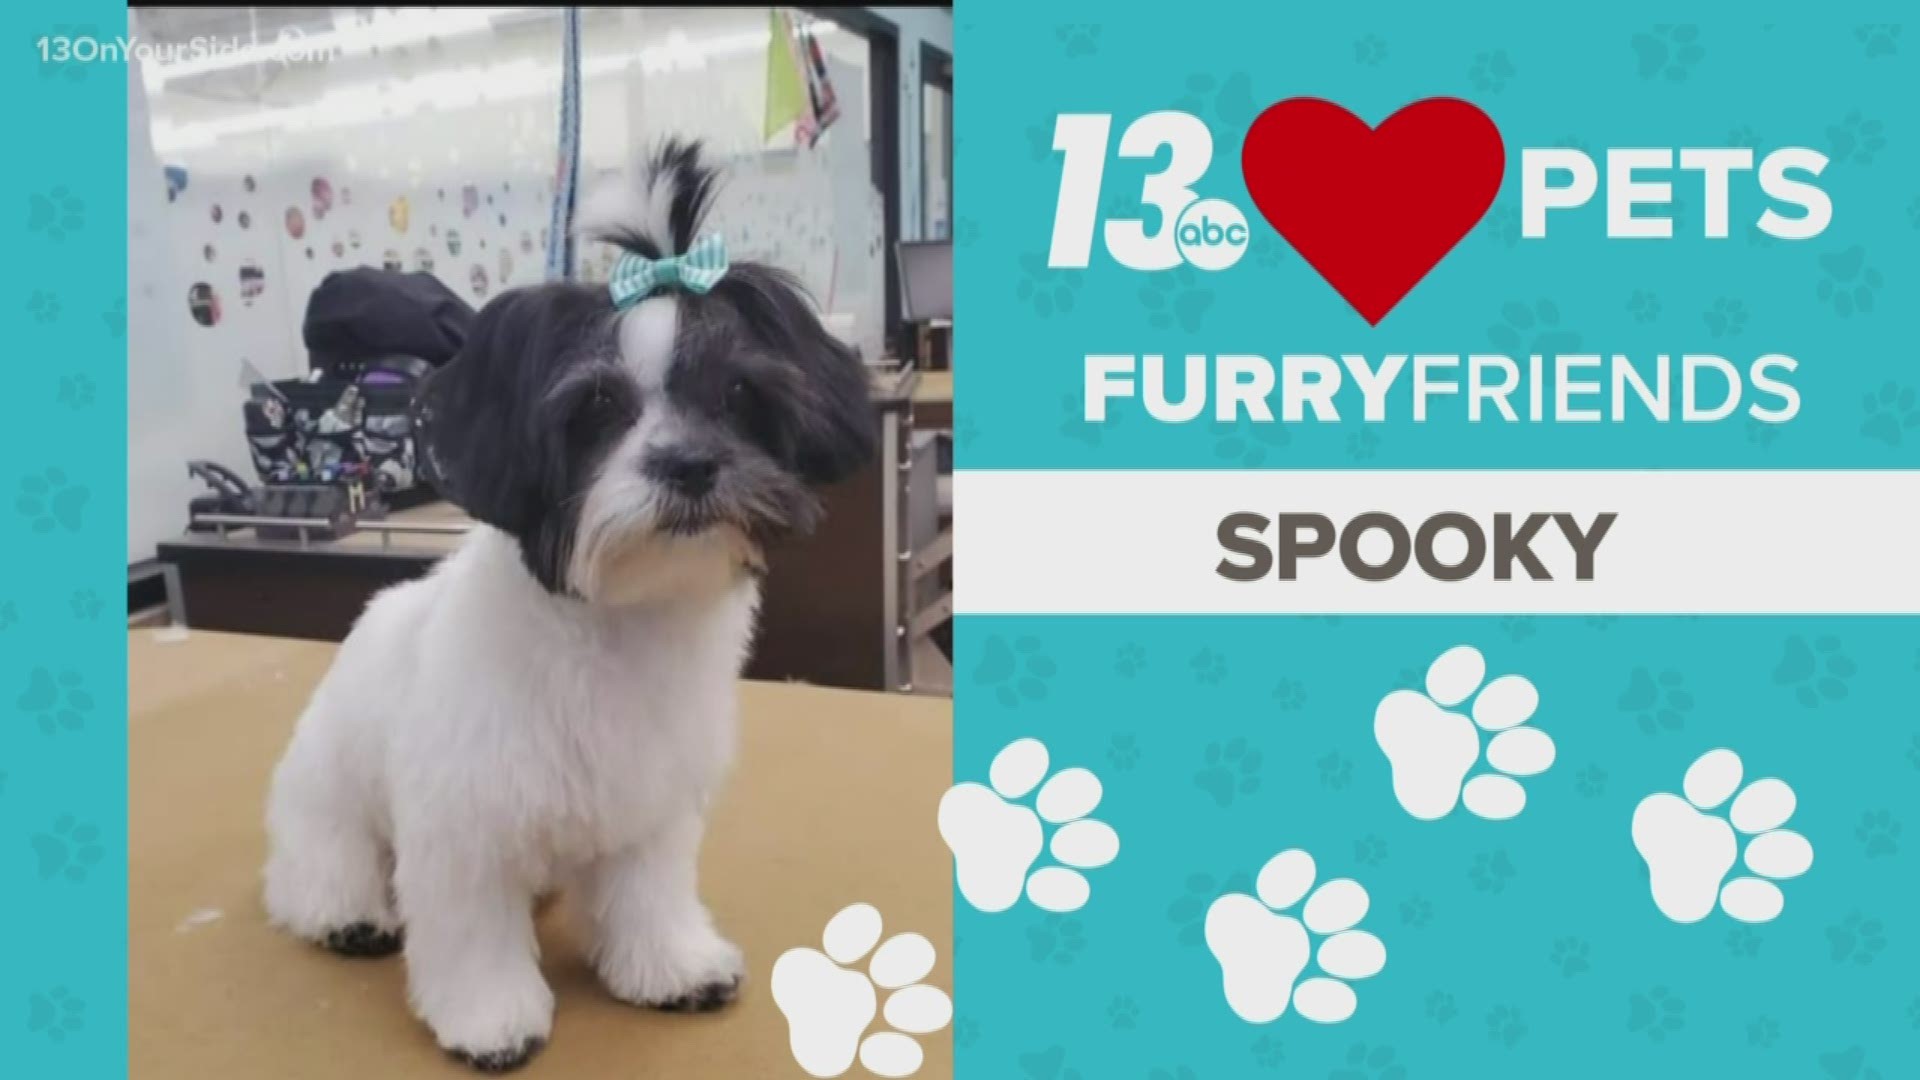 Meet today's Furry Friend of the Day: Spooky!